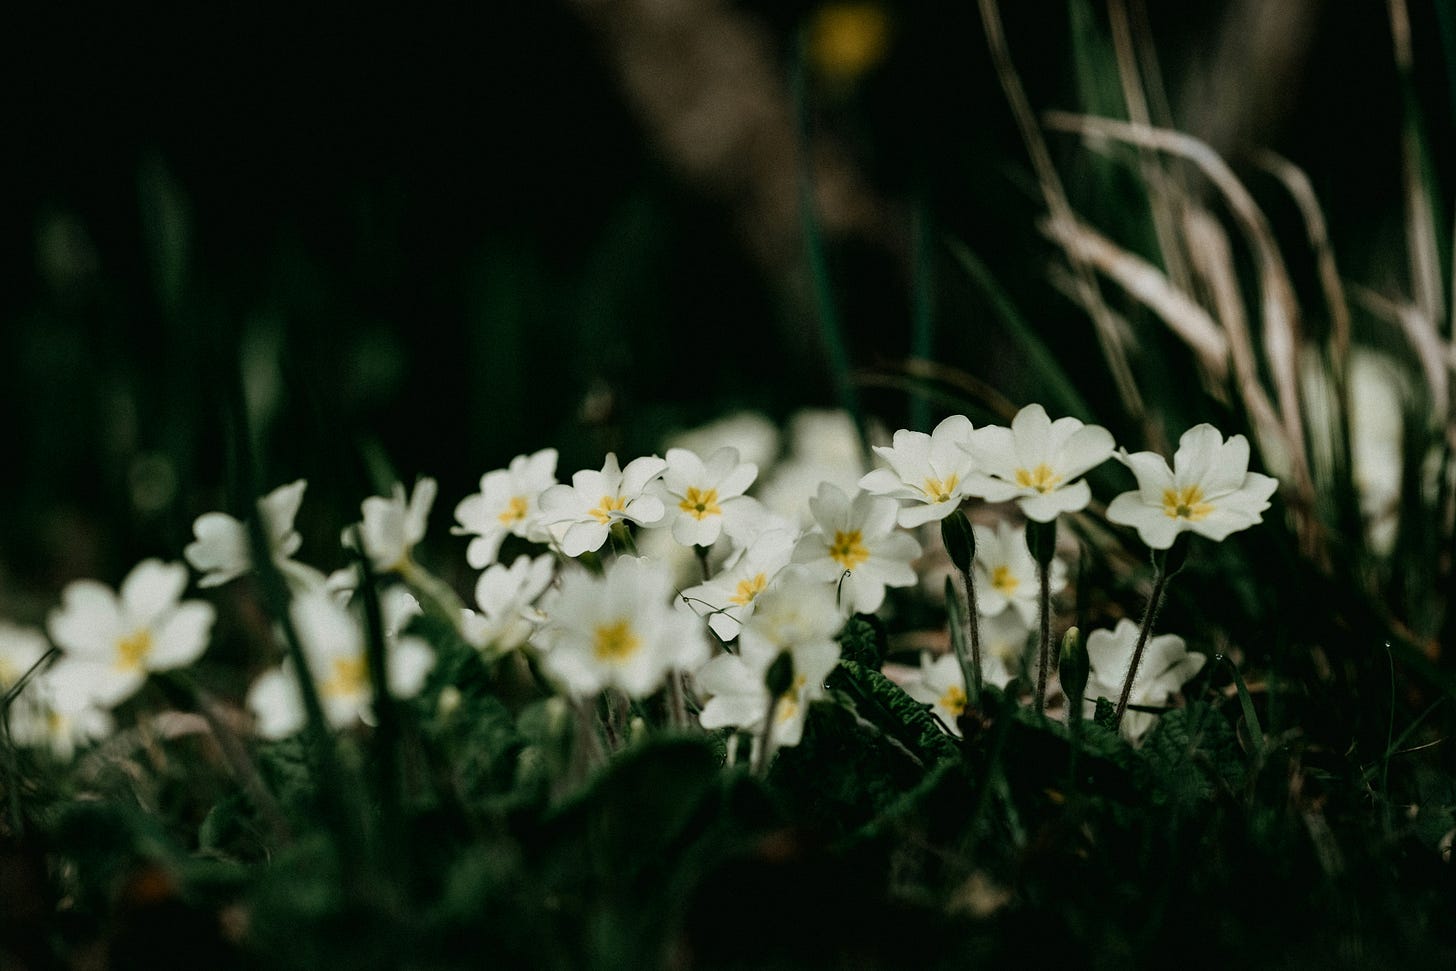 A close-up of wild pale yellow primroses nestled amongst grass with shadows in the background and foreground